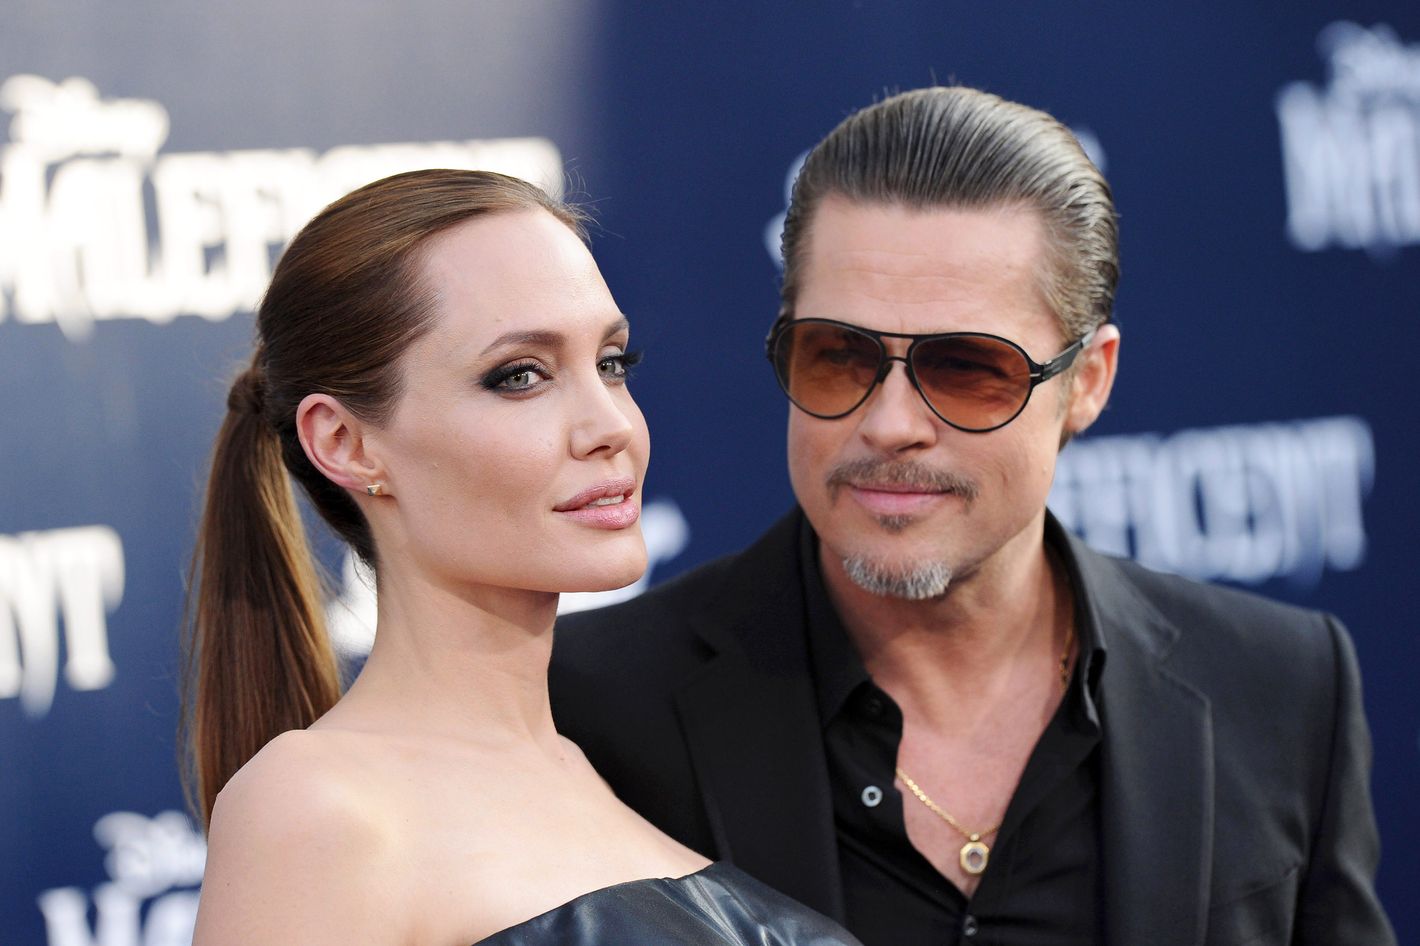 Every Theory About the Brad Pitt-Angelina Jolie Divorce